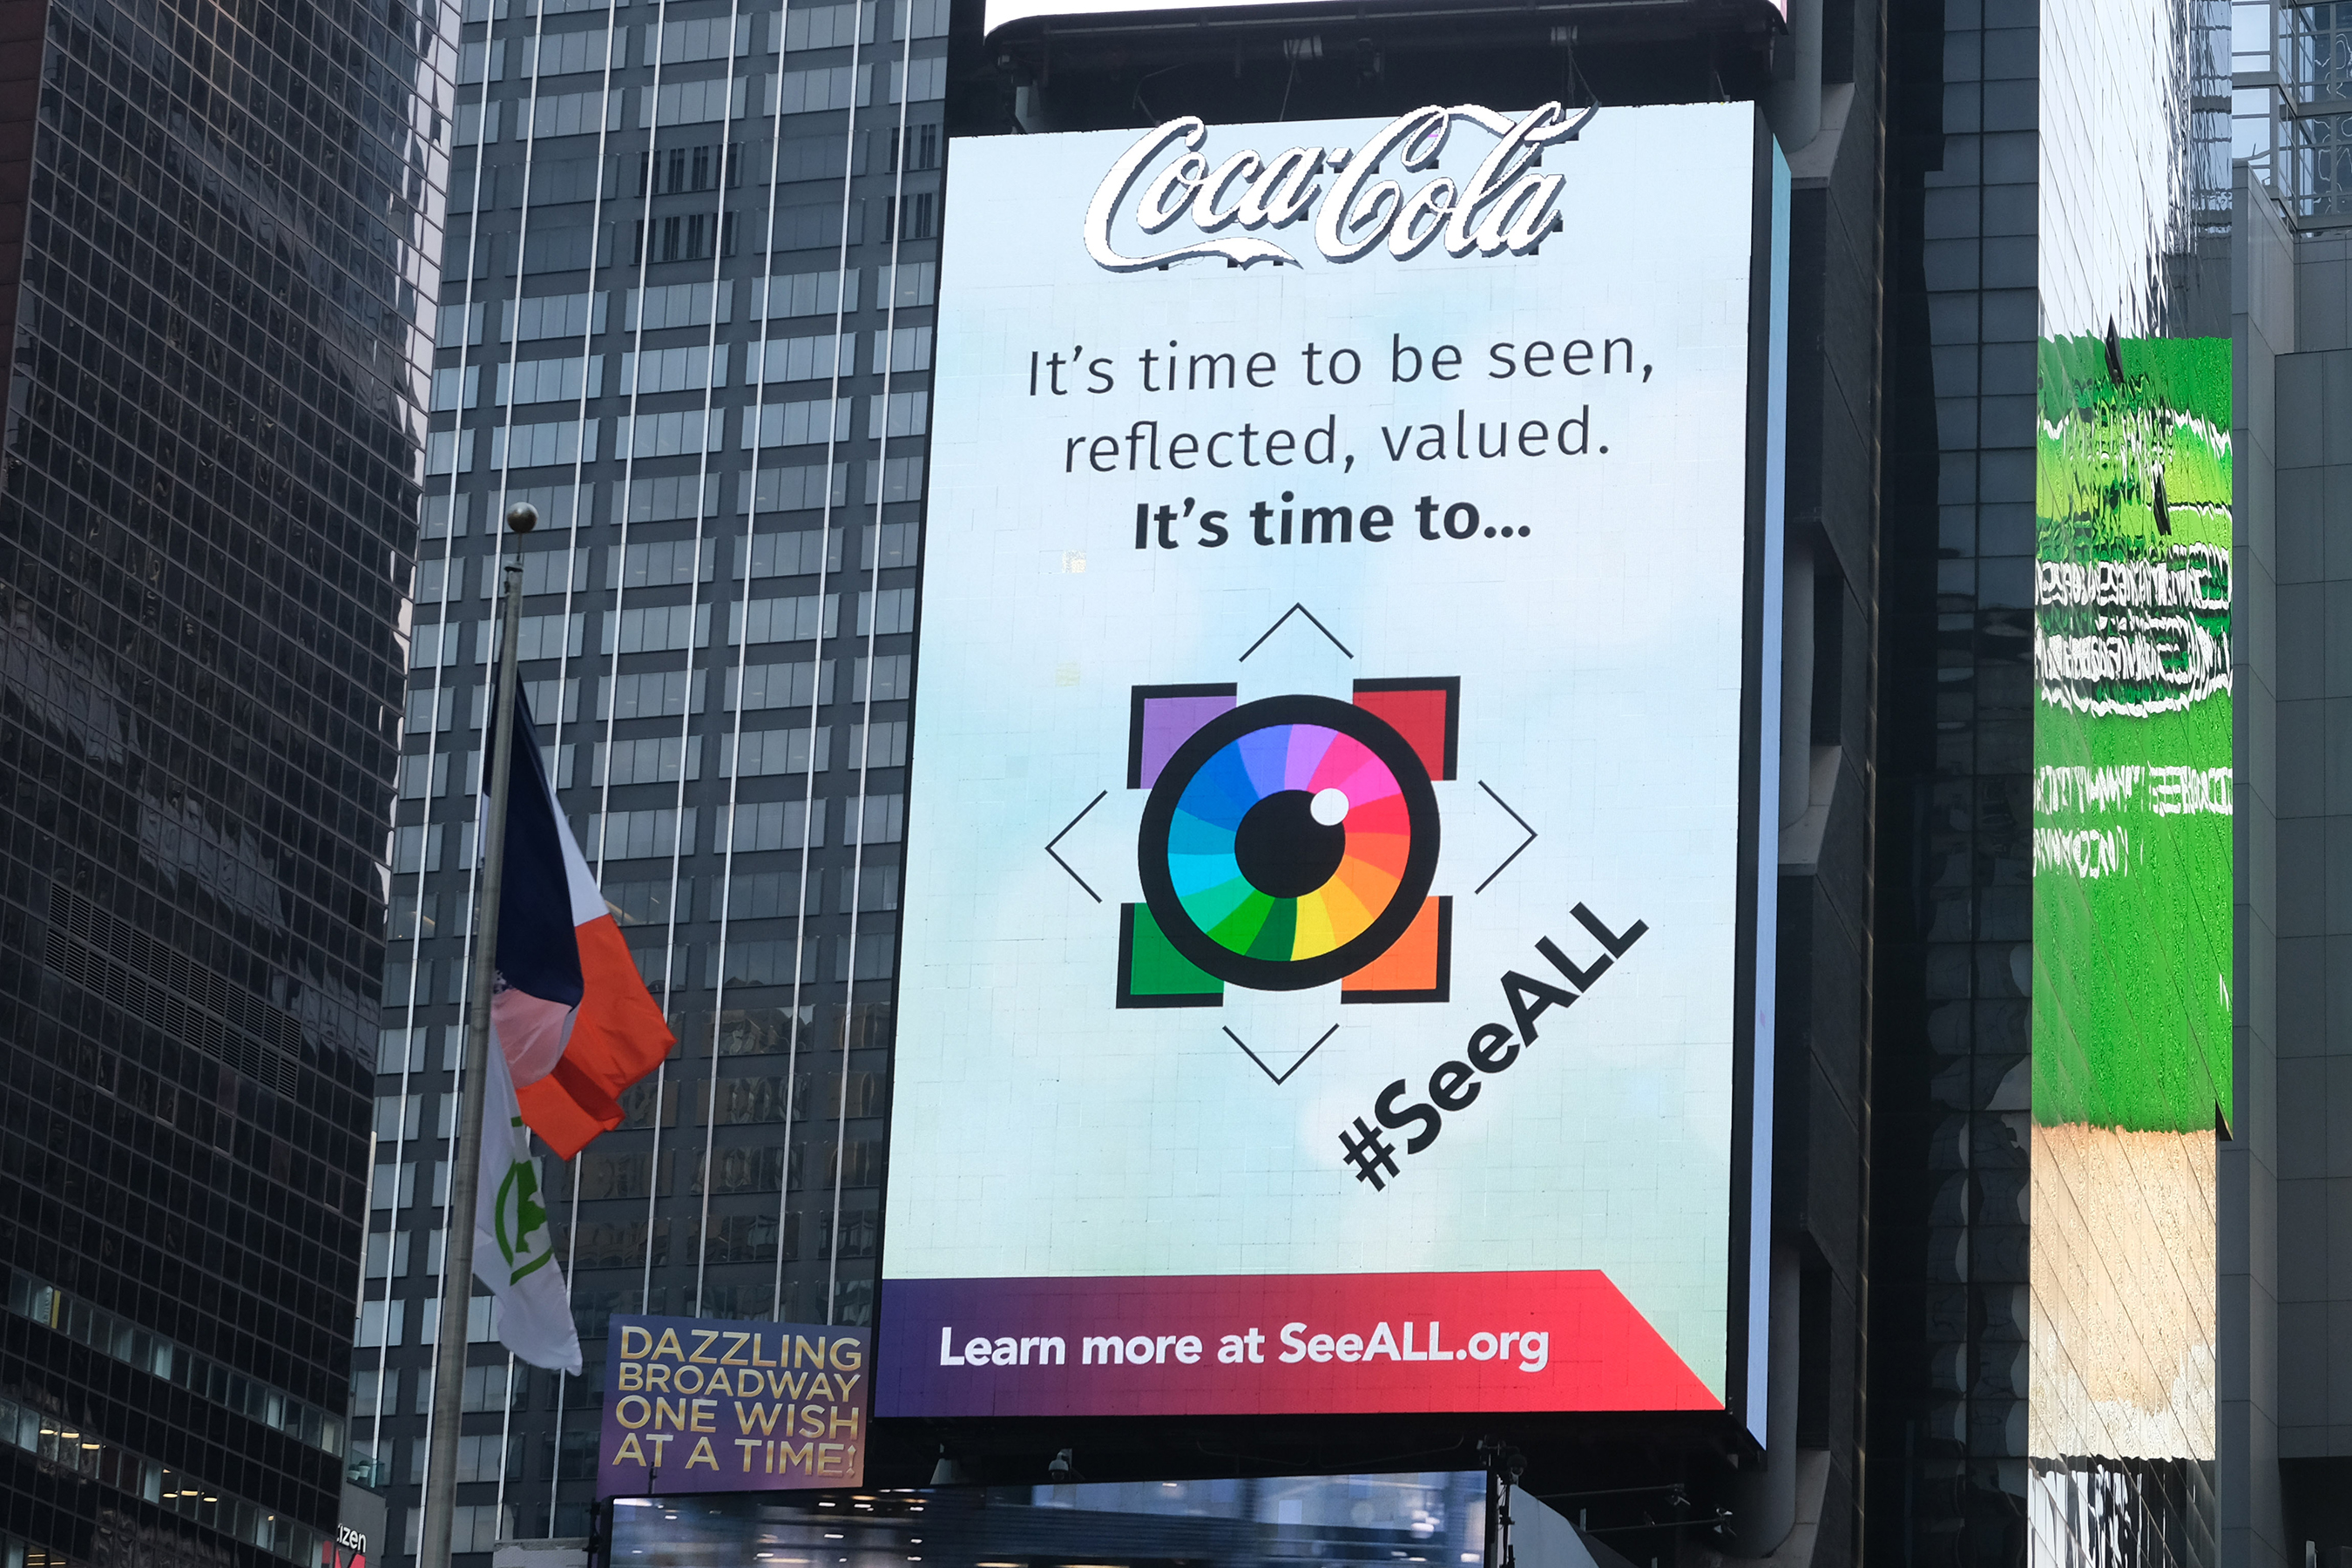 The Association of National Advertisers' (ANA) Alliance for Inclusive and MultiCultural Marketing (AIMM) launches #SeeALL campaign promoting greater diversity and cultural inclusion in brand advertising with a billboard takeover in NYC's Times Square on Monday, Sept. 23, 2019. Photo Credit: AP Images for Alliance for Inclusive and Multicultural Marketing (AIMM)